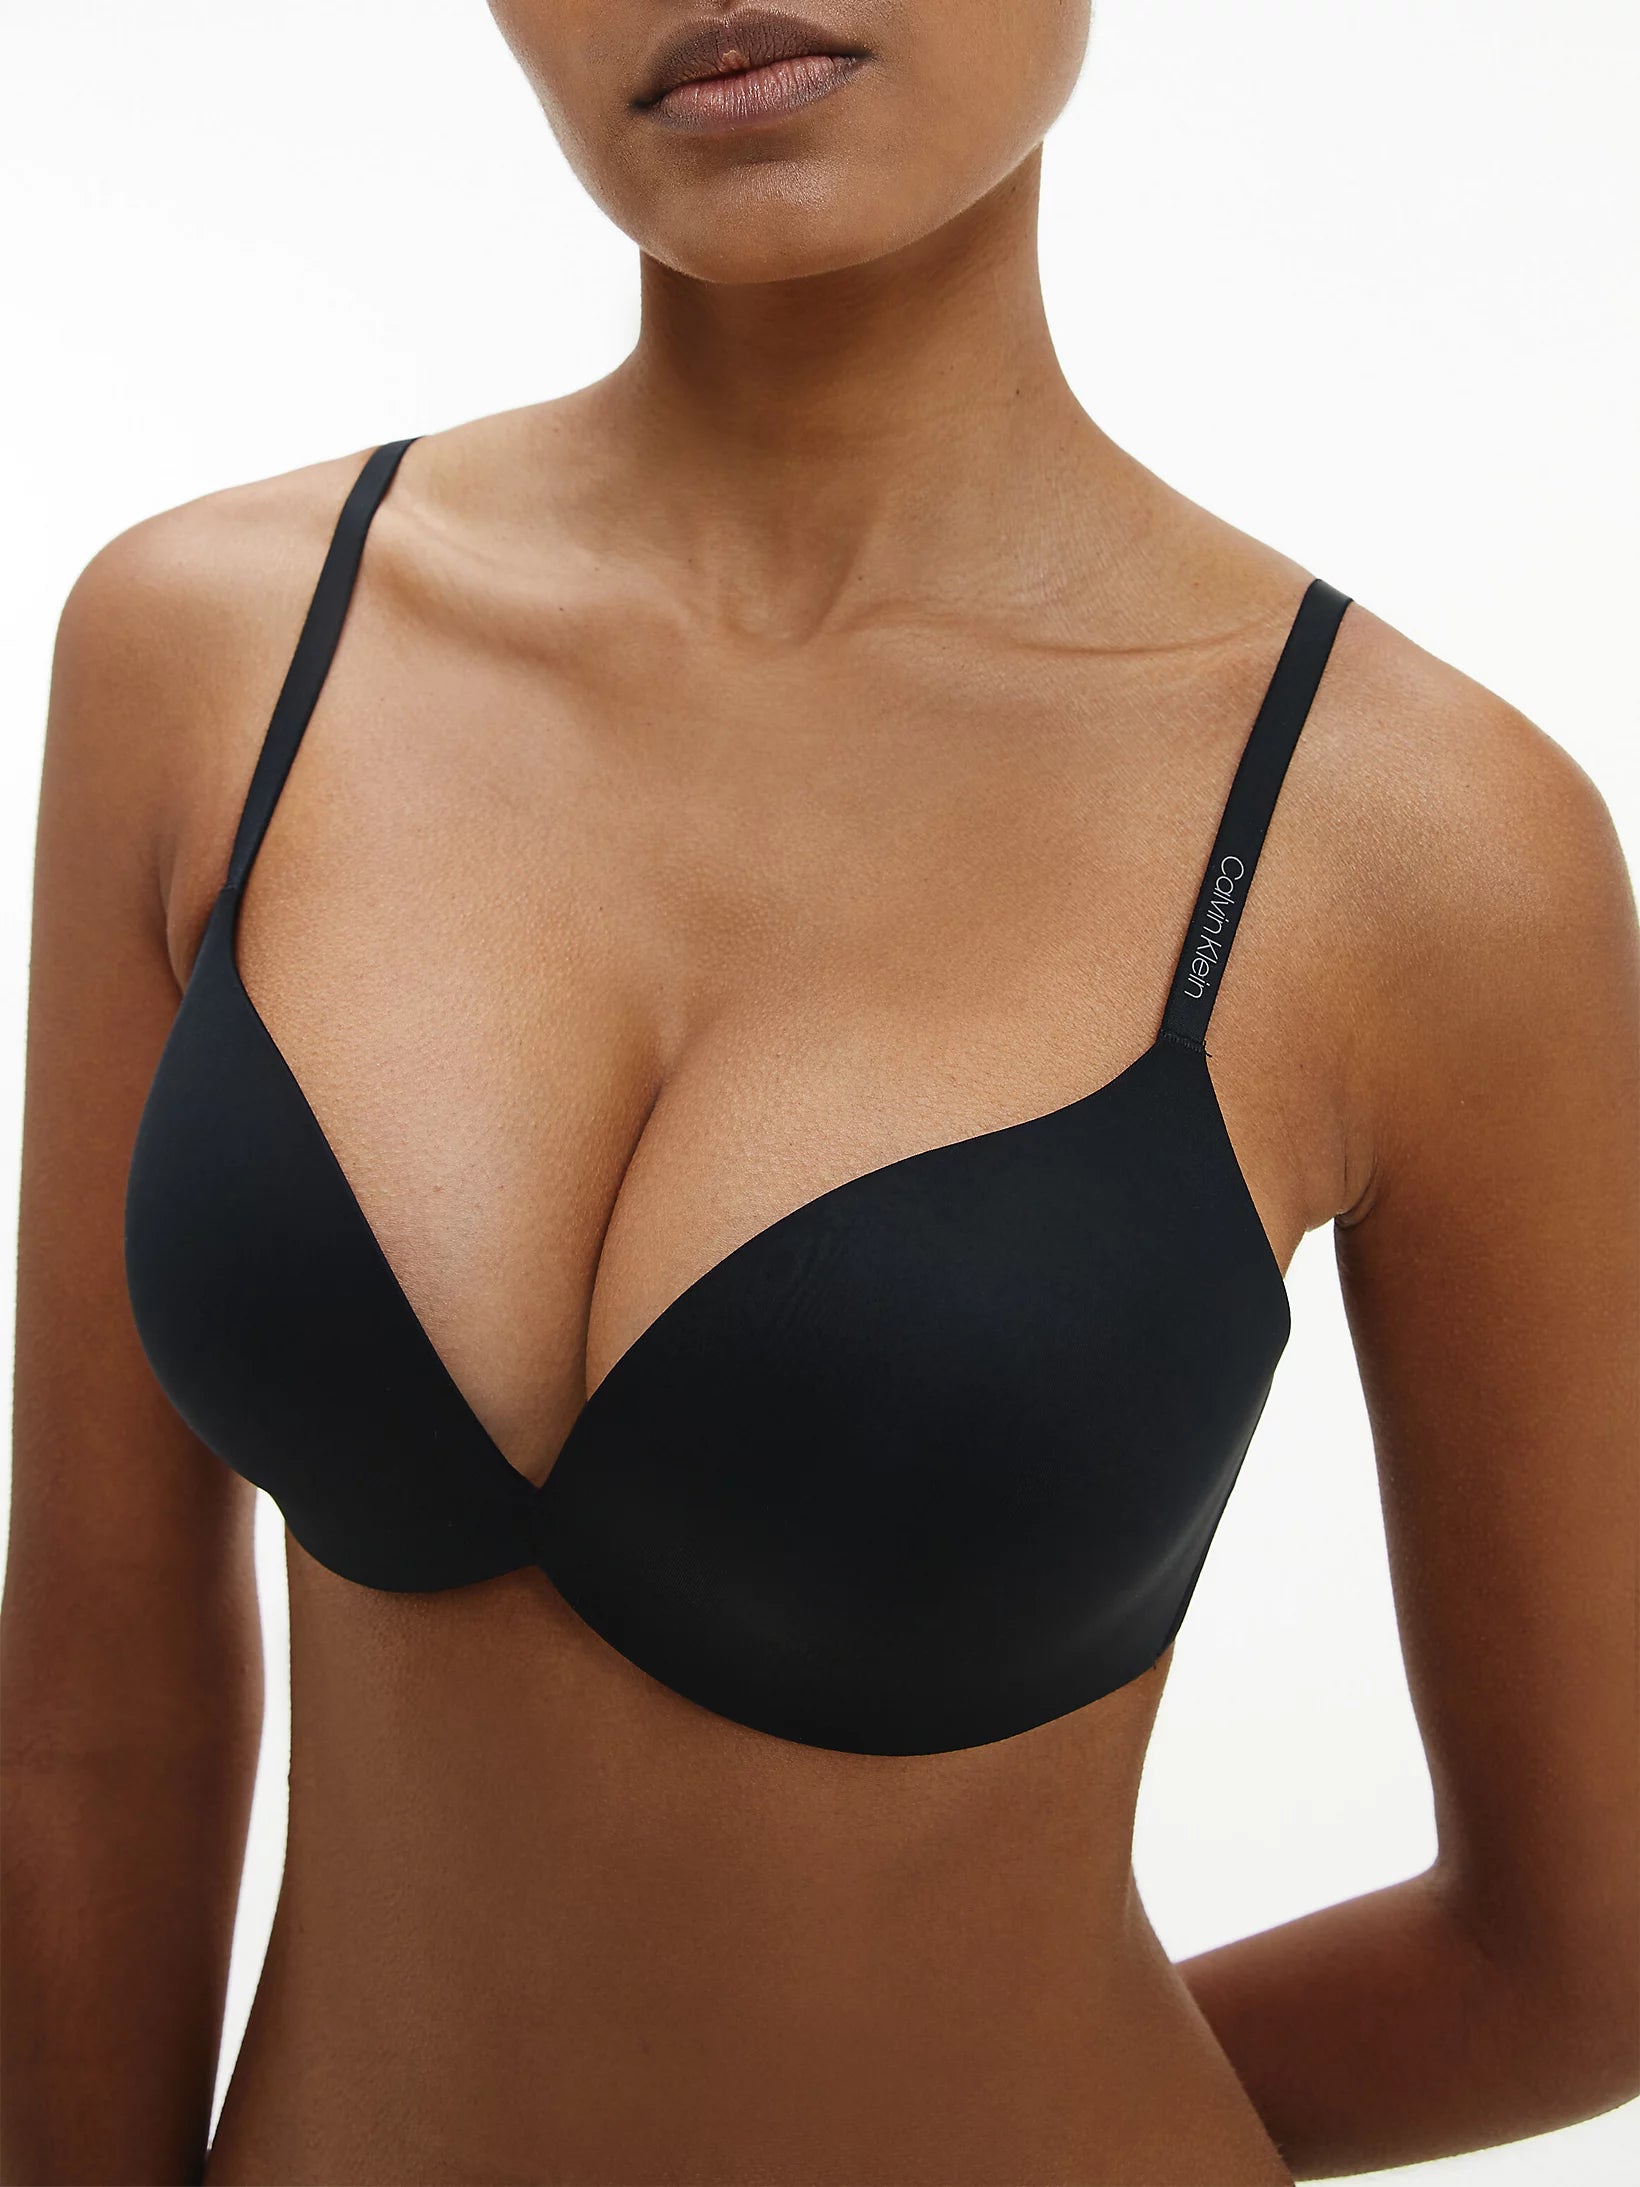 Calvin Klein bra push-up low v padded bras (2 black and 1 beige), Women's  Fashion, New Undergarments & Loungewear on Carousell